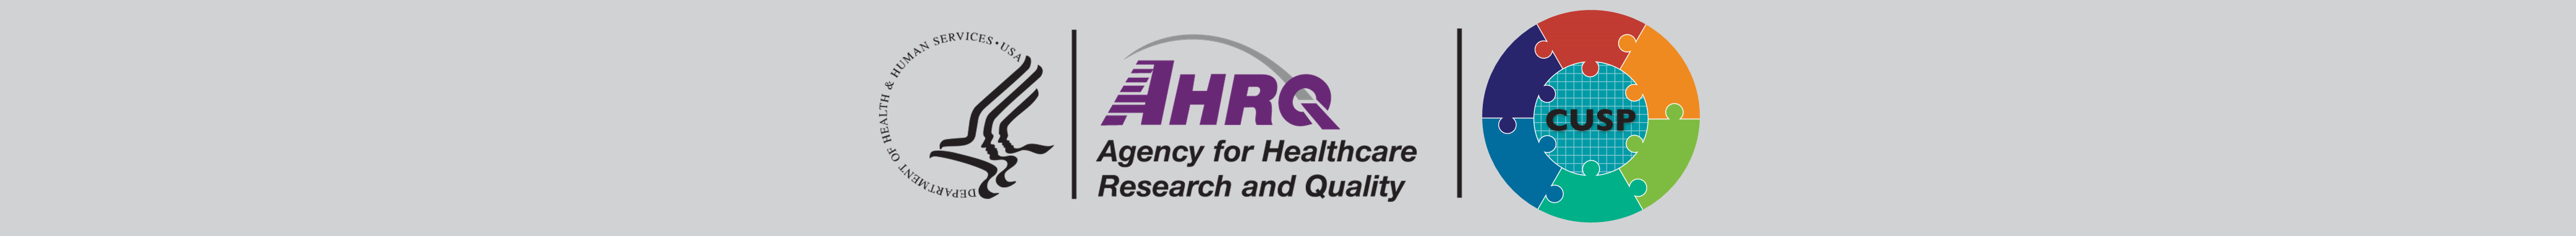 DHHS, AHRQ, and CUSP logo